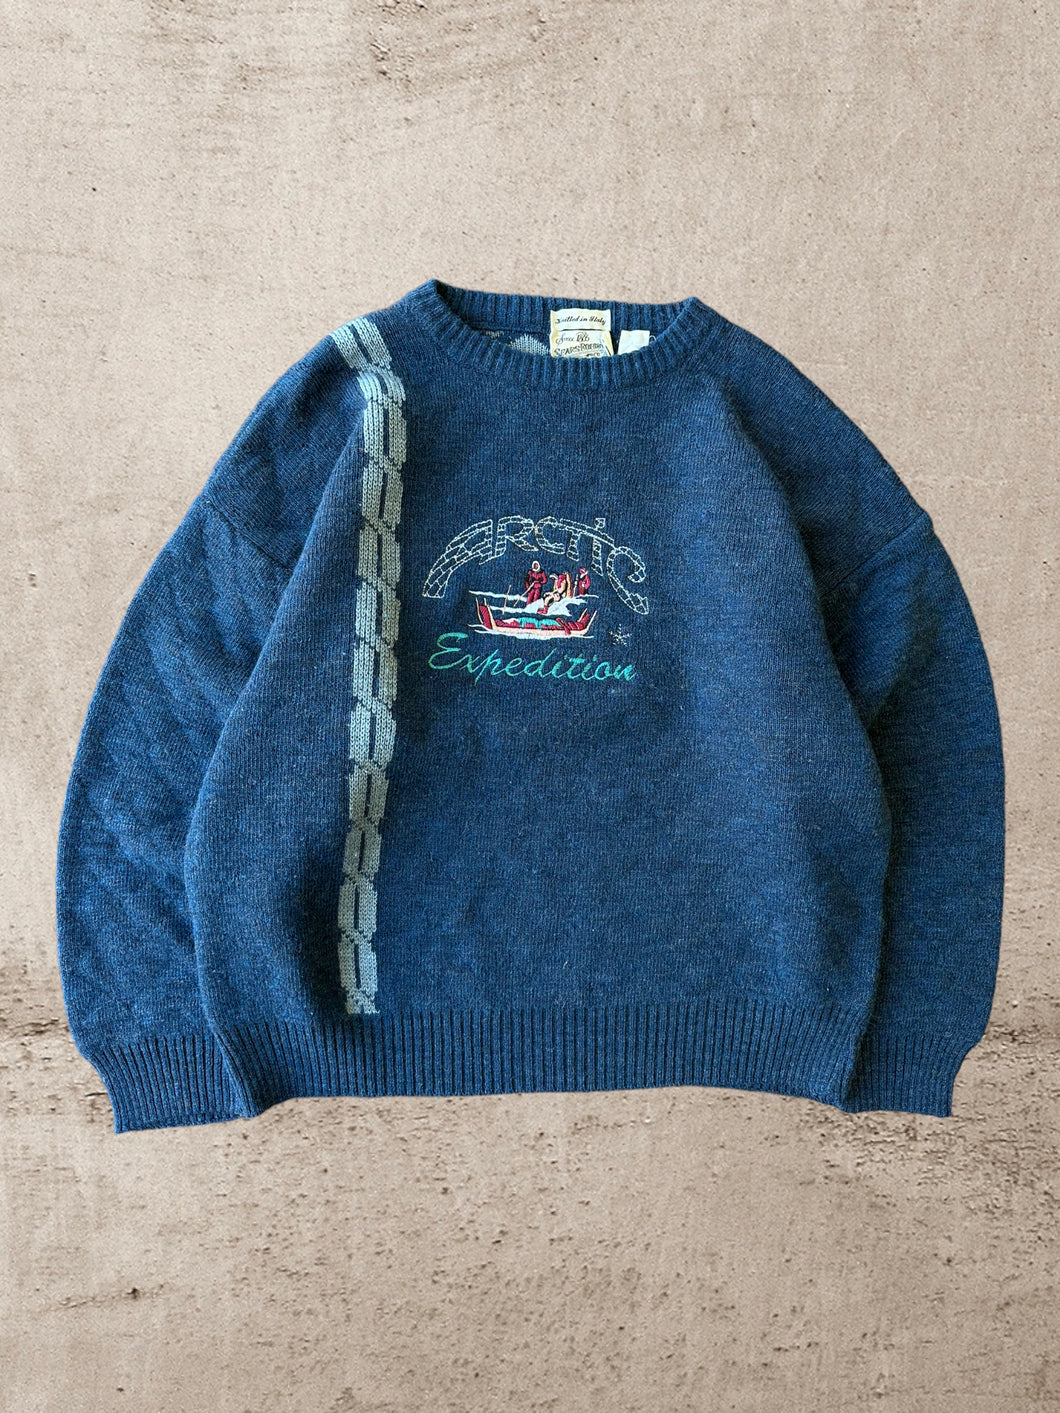 90s Arctic Expedition Knit Sweater - Large